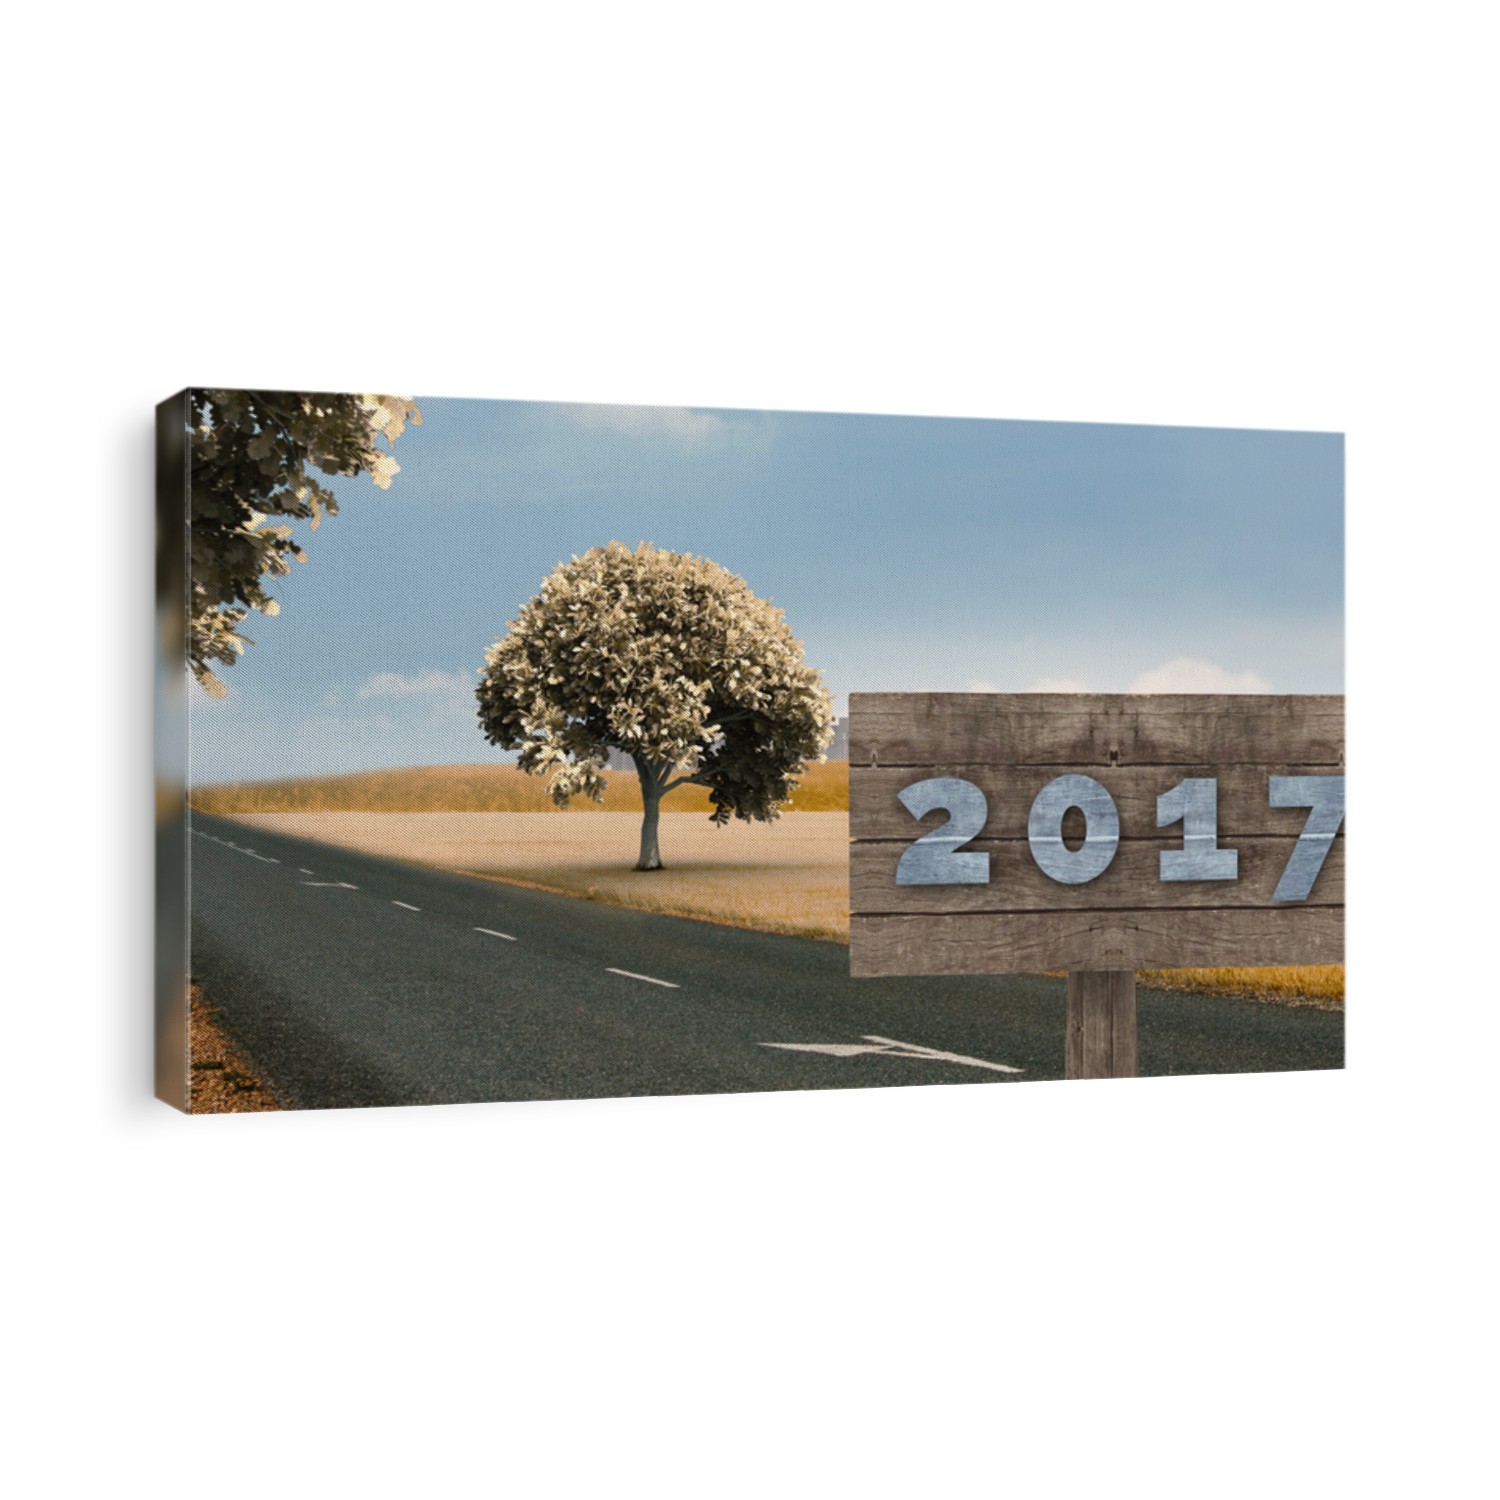 Digital image of new year 2017 against road leading out to the horizon